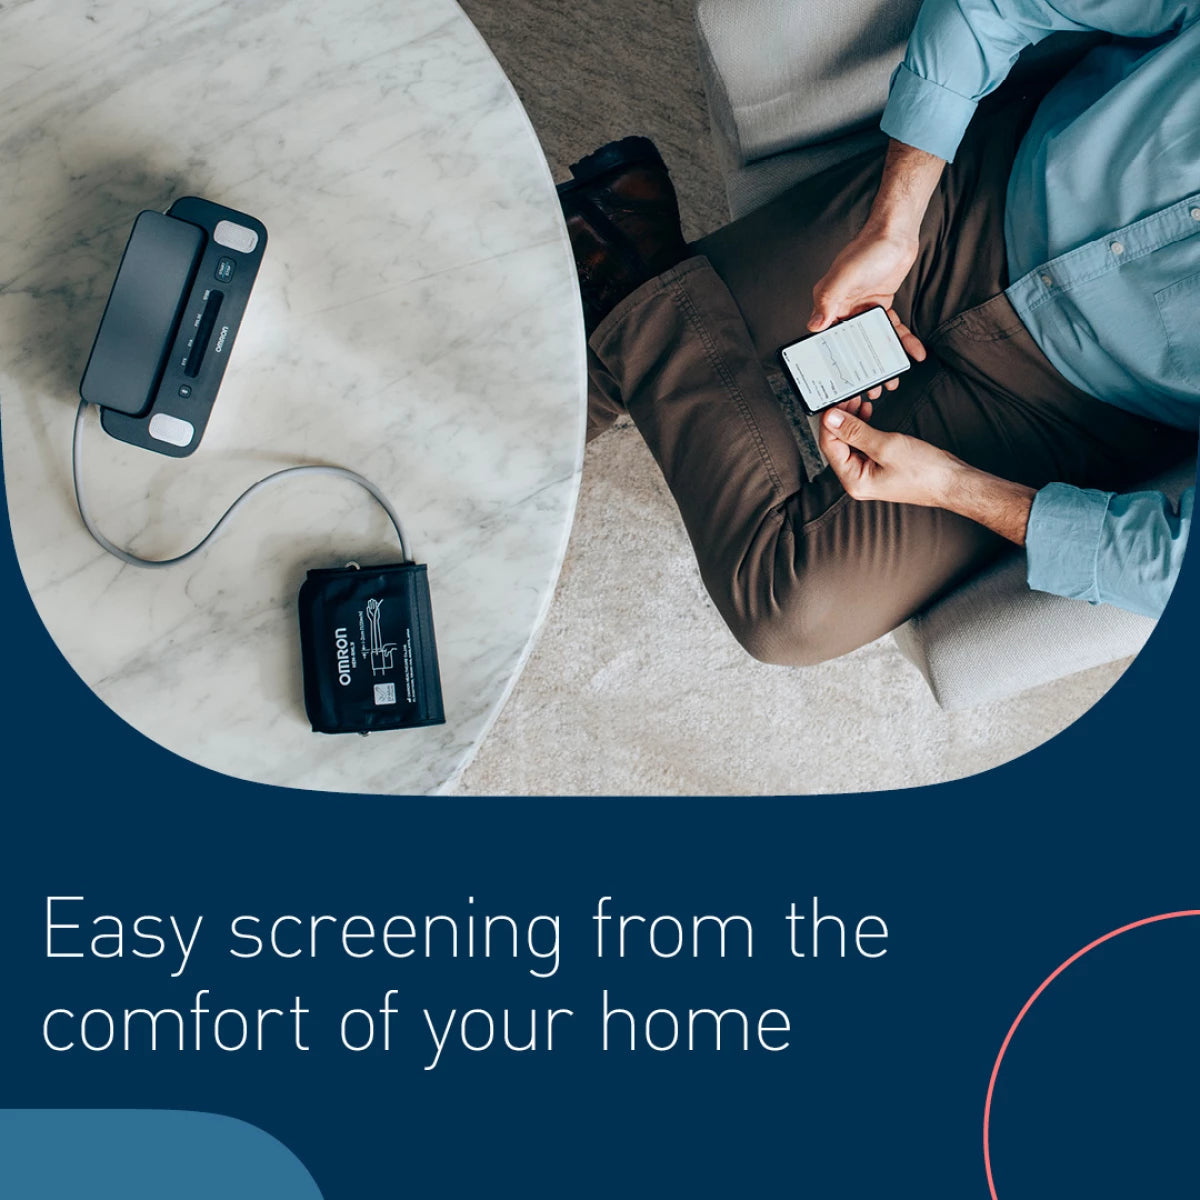 Easy screening from your home